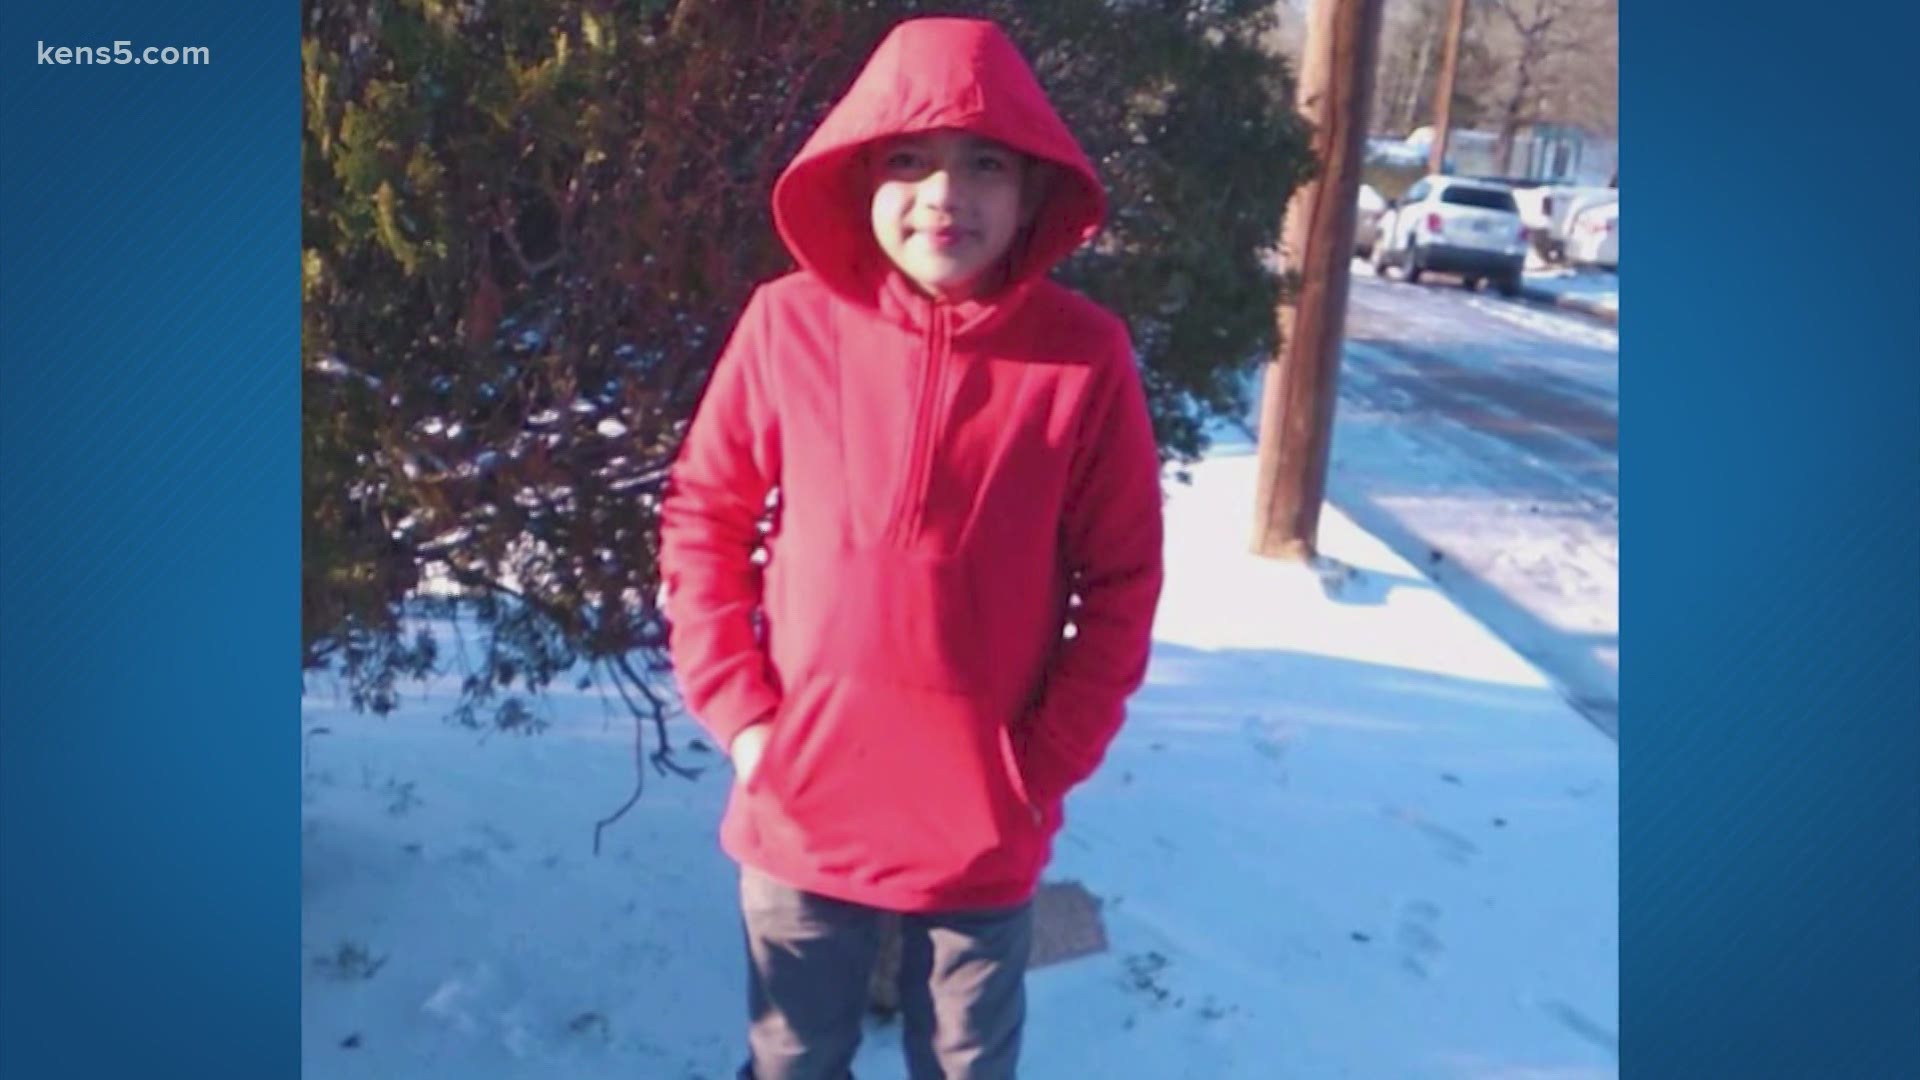 The lawsuit alleges gross negligence by the power grid operator and the electricity provider, saying it led to the death of 11-year-old Christian Pavon.